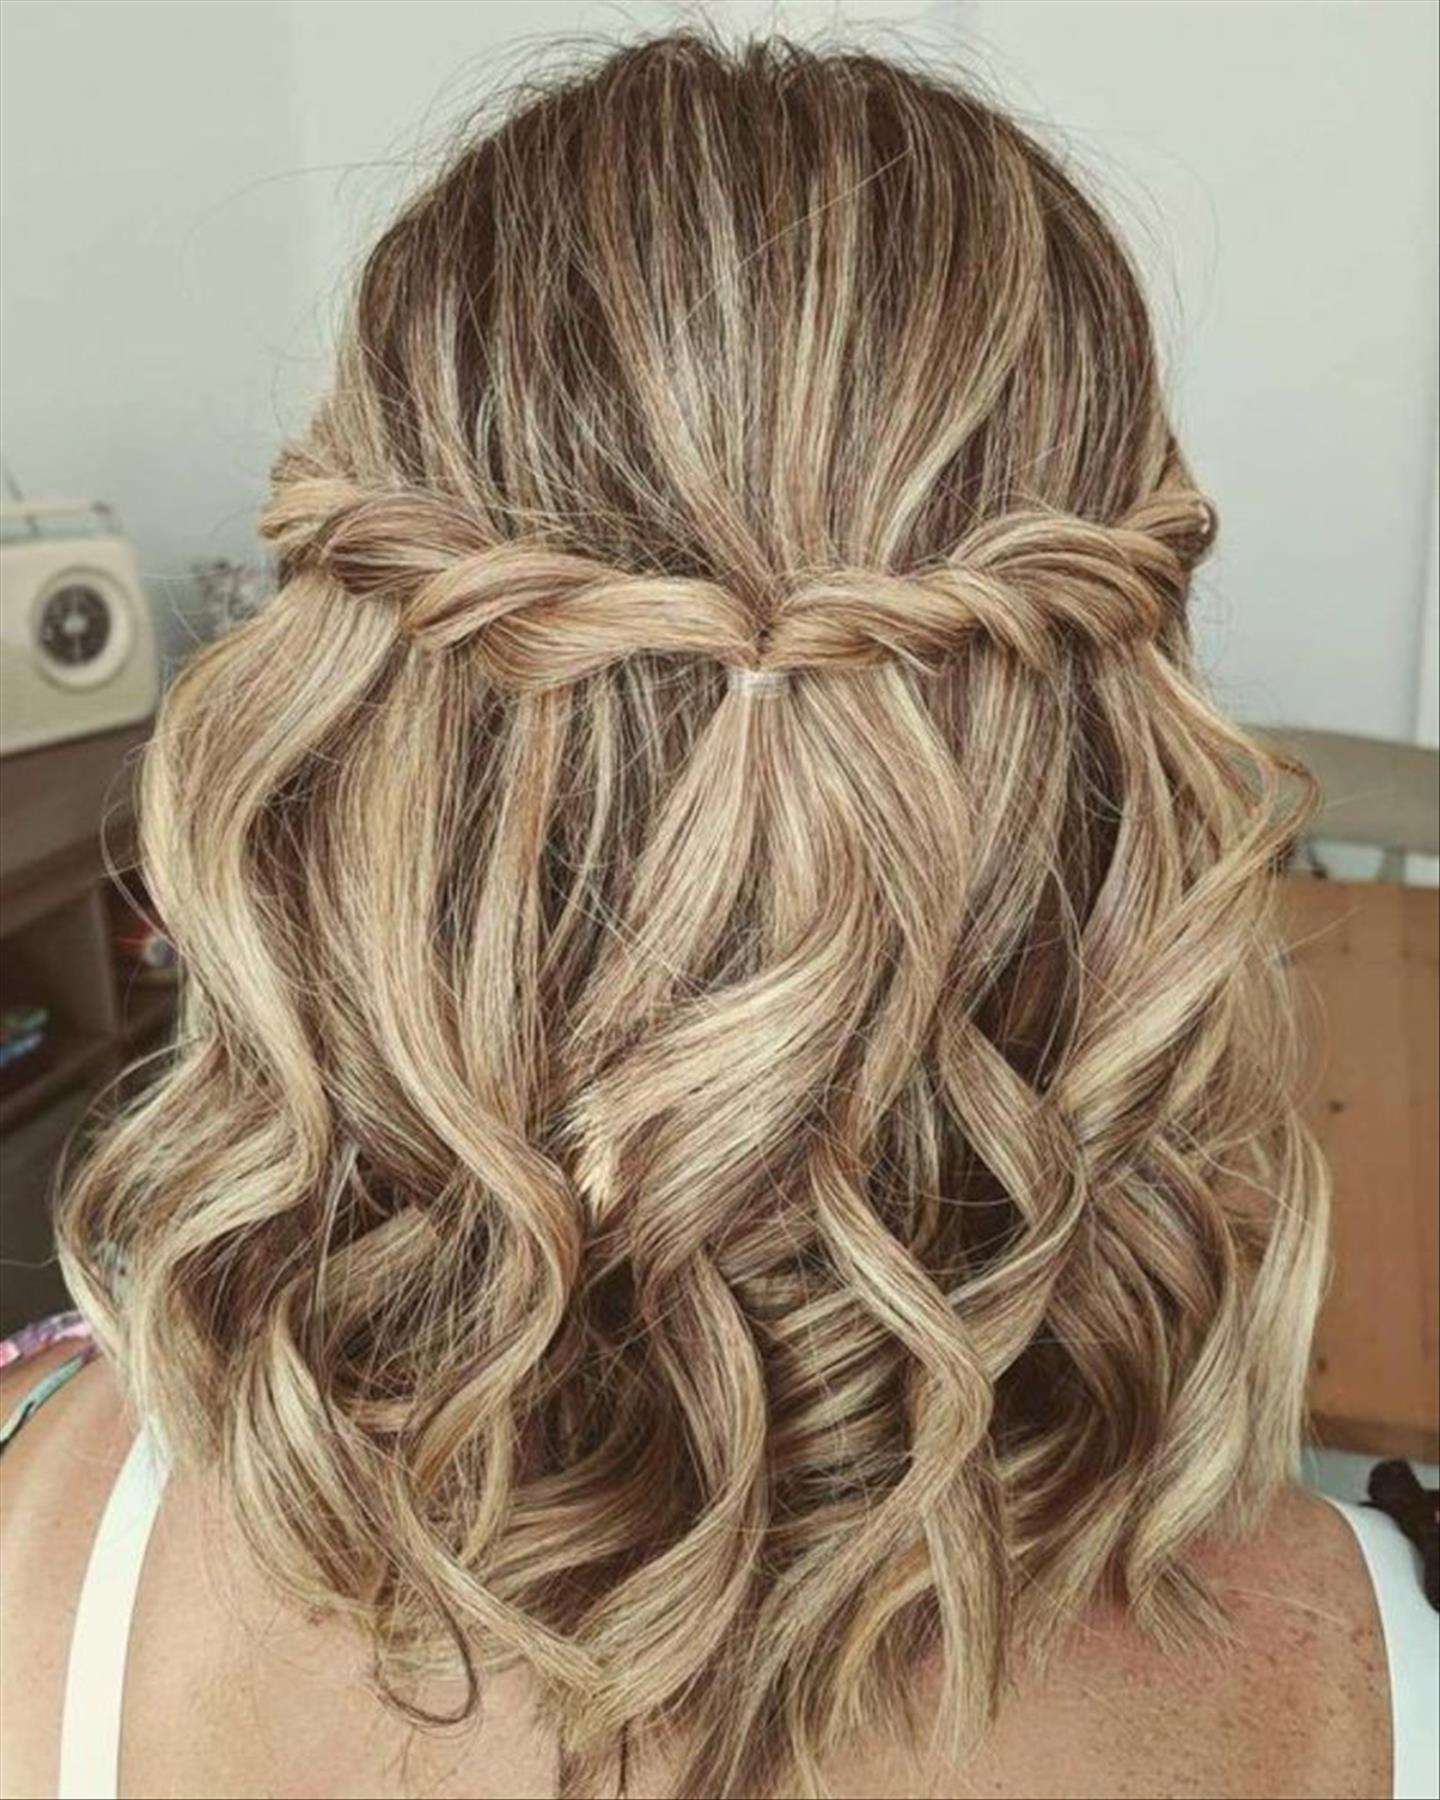 Elegant prom hairstyles for short hair to try in 2023